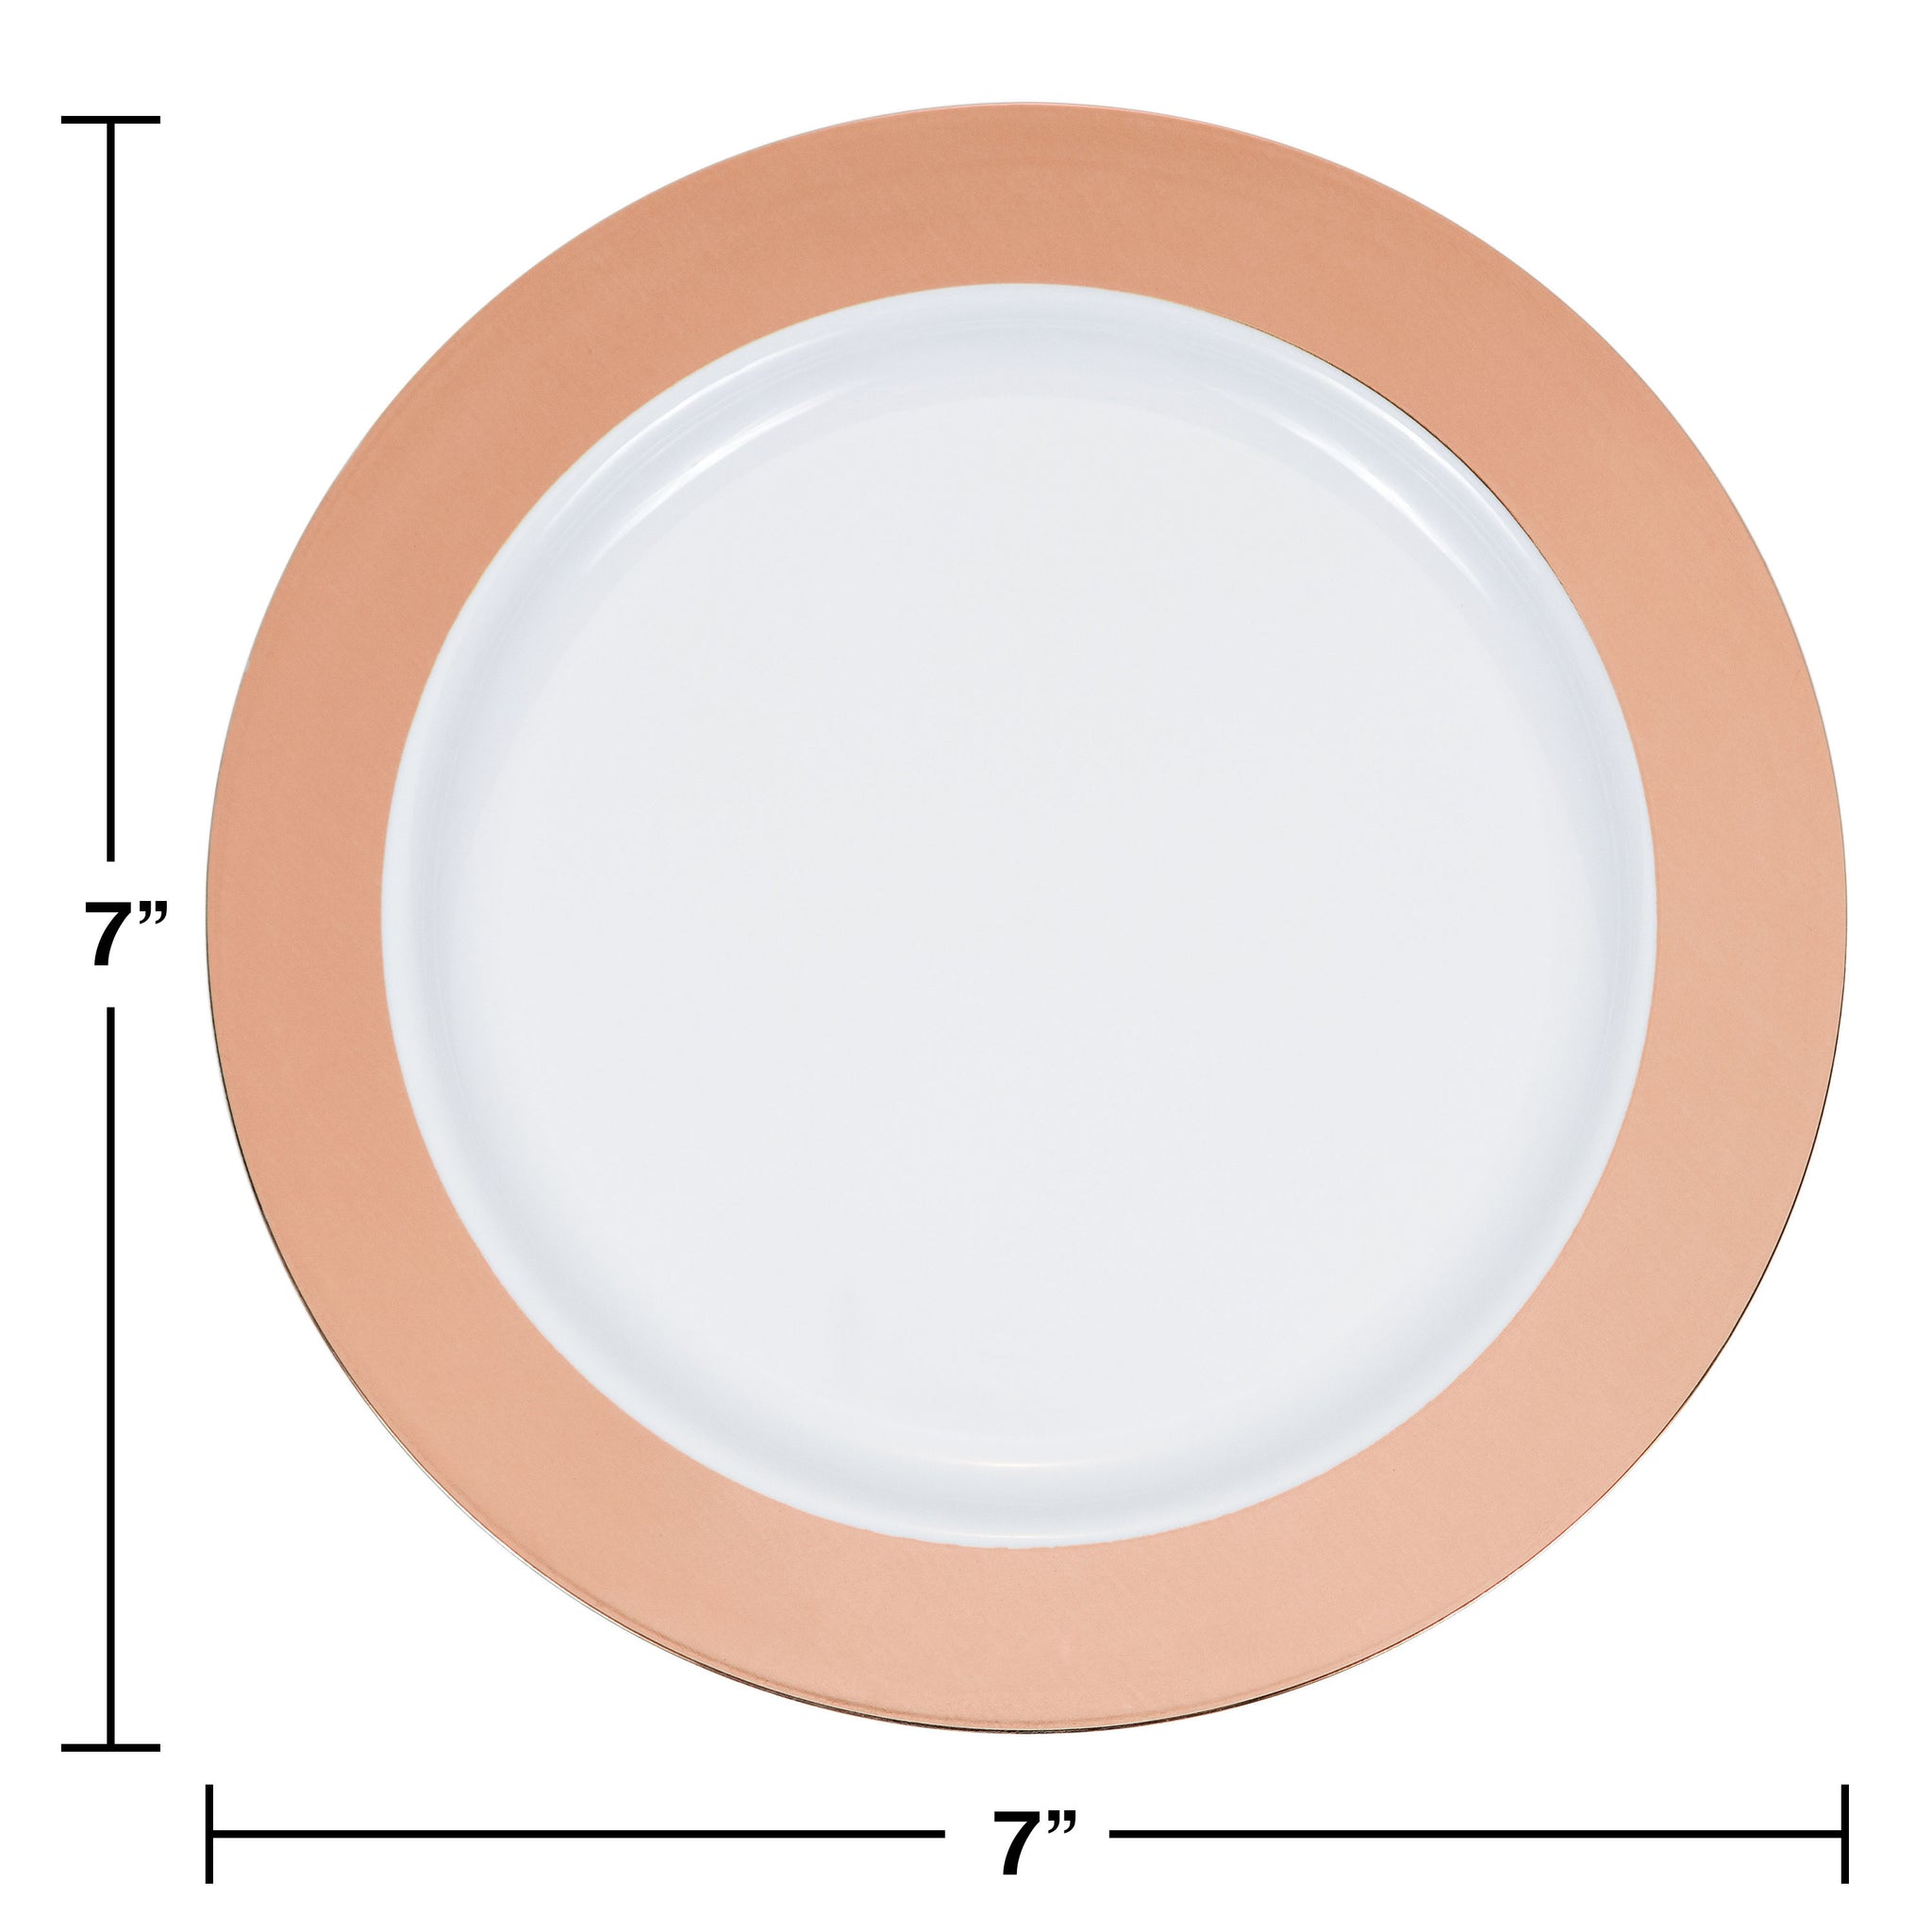 Hard Plastic Rose Gold 7in Plates 10ct